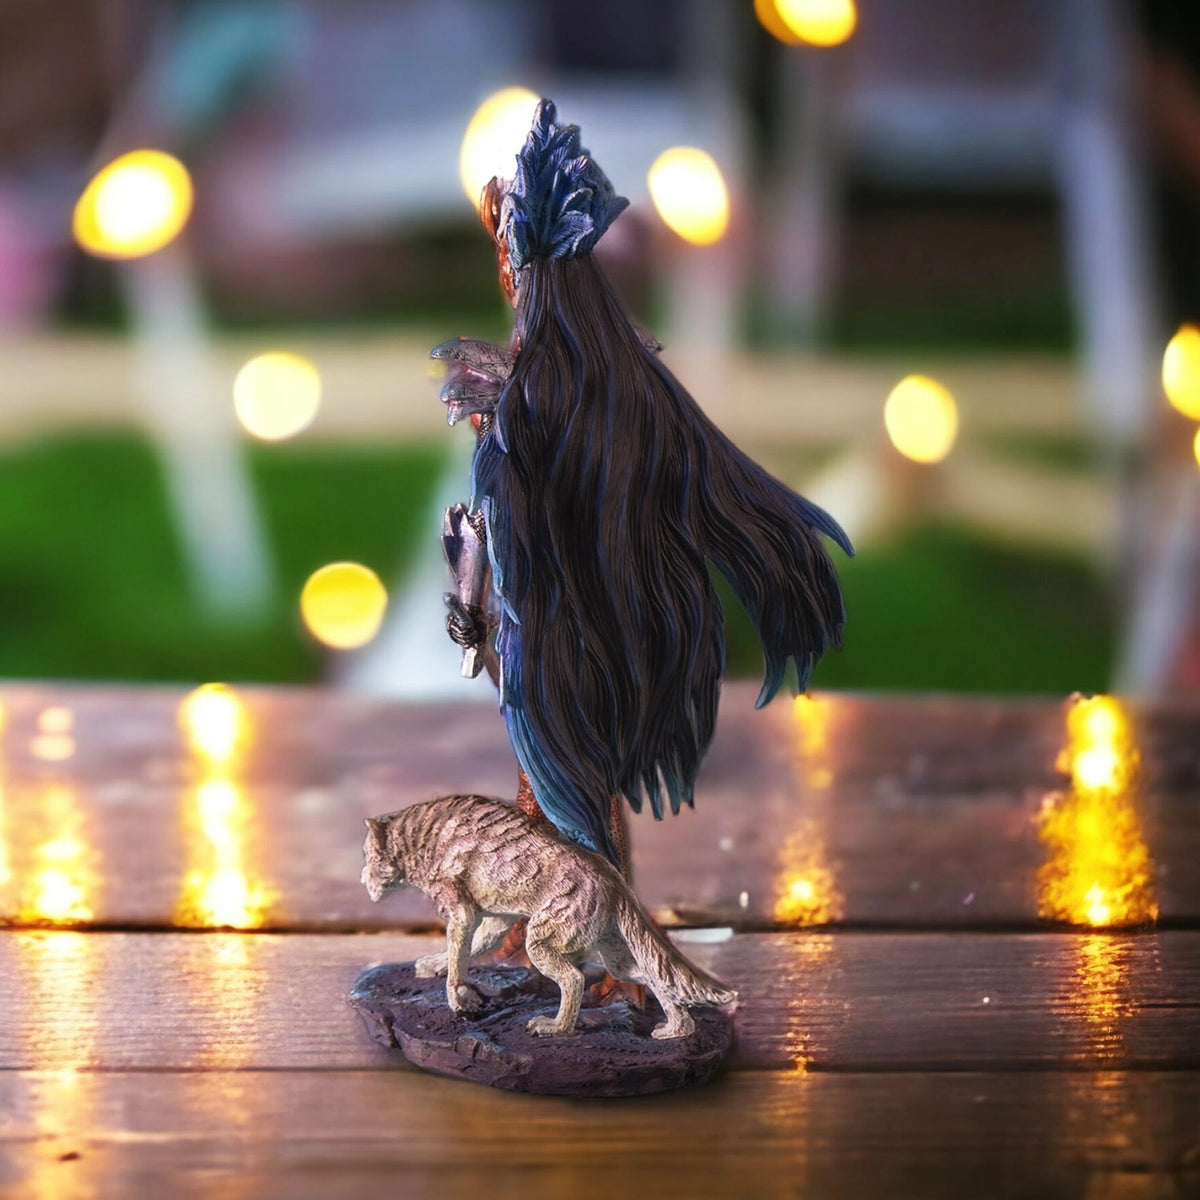 Fire of Ring Figurine